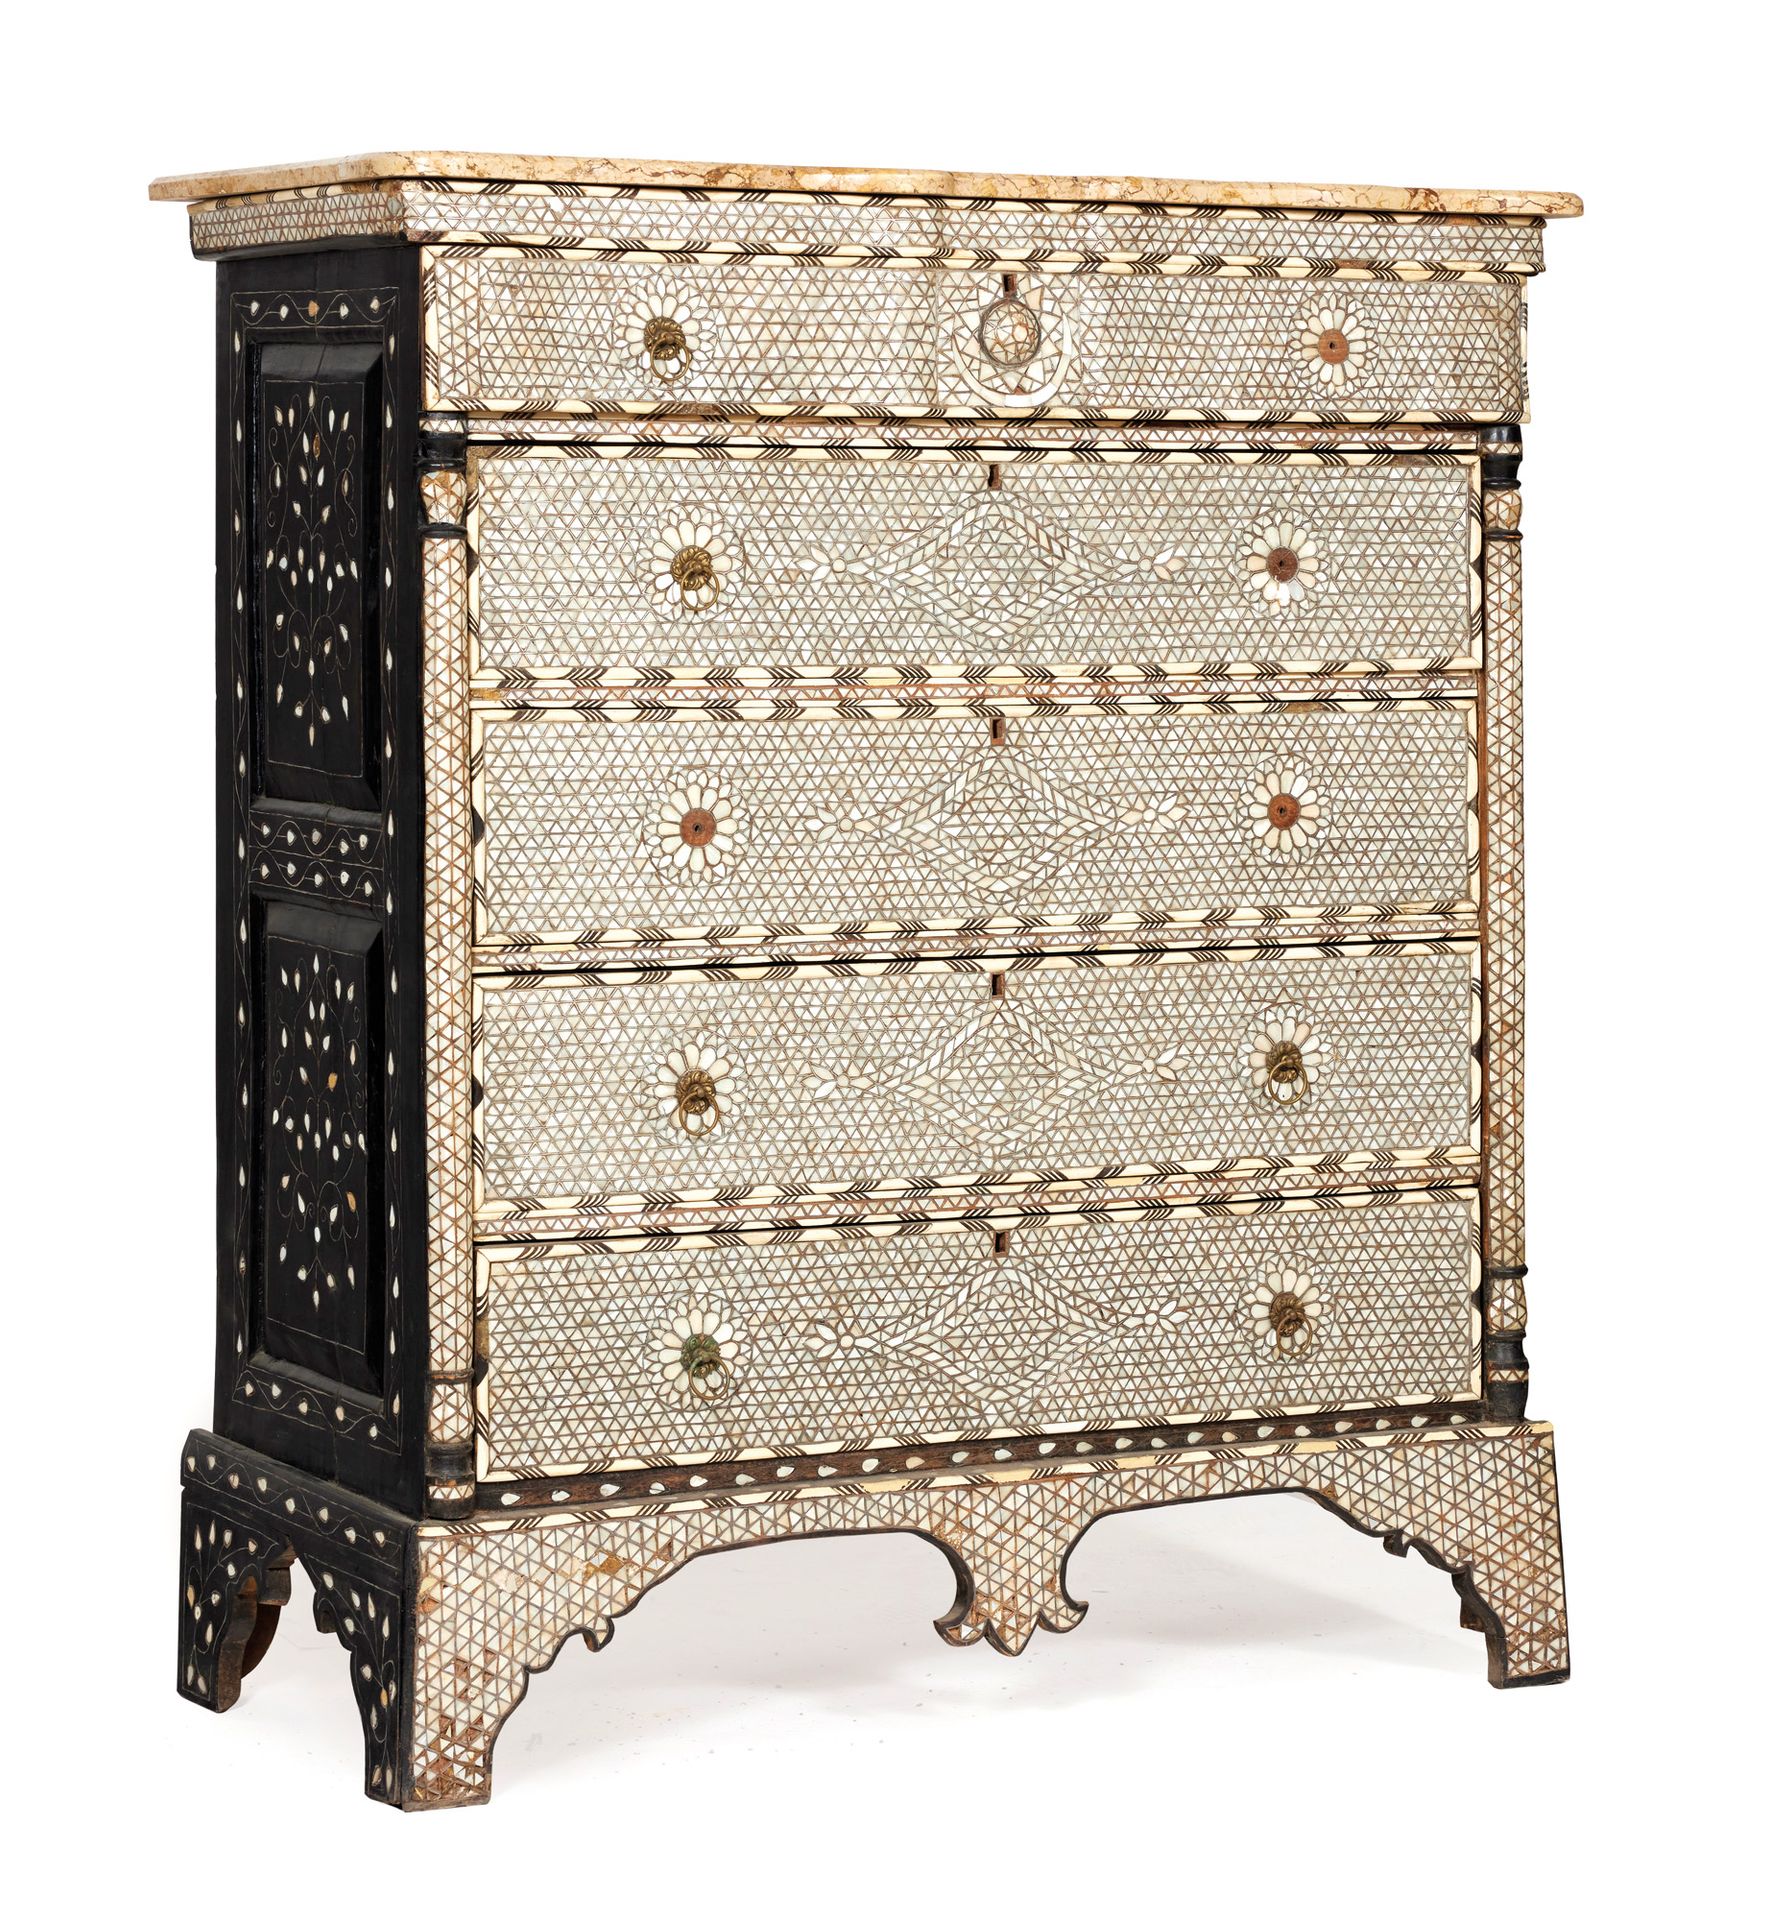 Haute commode High chest of drawers

in blackened wood and mother-of-pearl marqu&hellip;